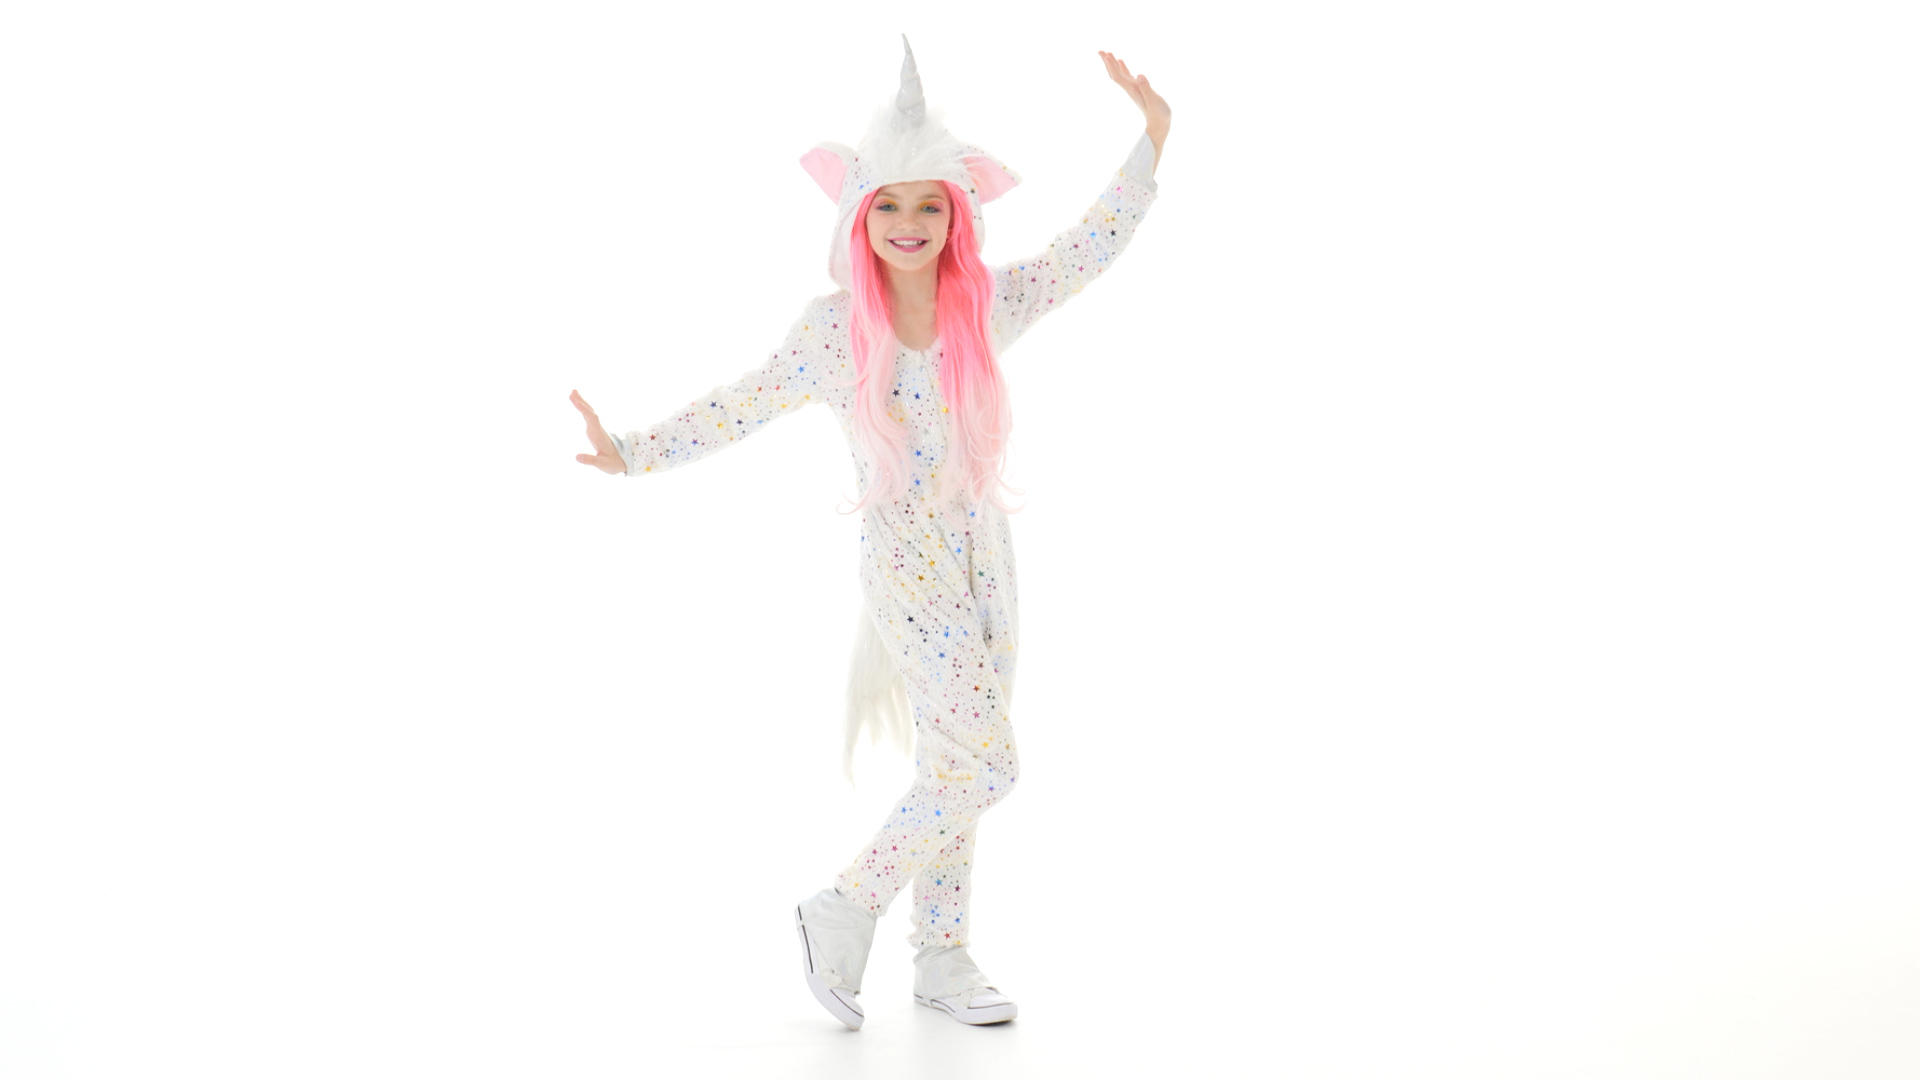 Transform your child in to a mystical unicorn with this exclusive Girl's Magical Unicorn Costume. It features a unicorn jumpsuit with a rainbow star print and an attached silver unicorn horn.